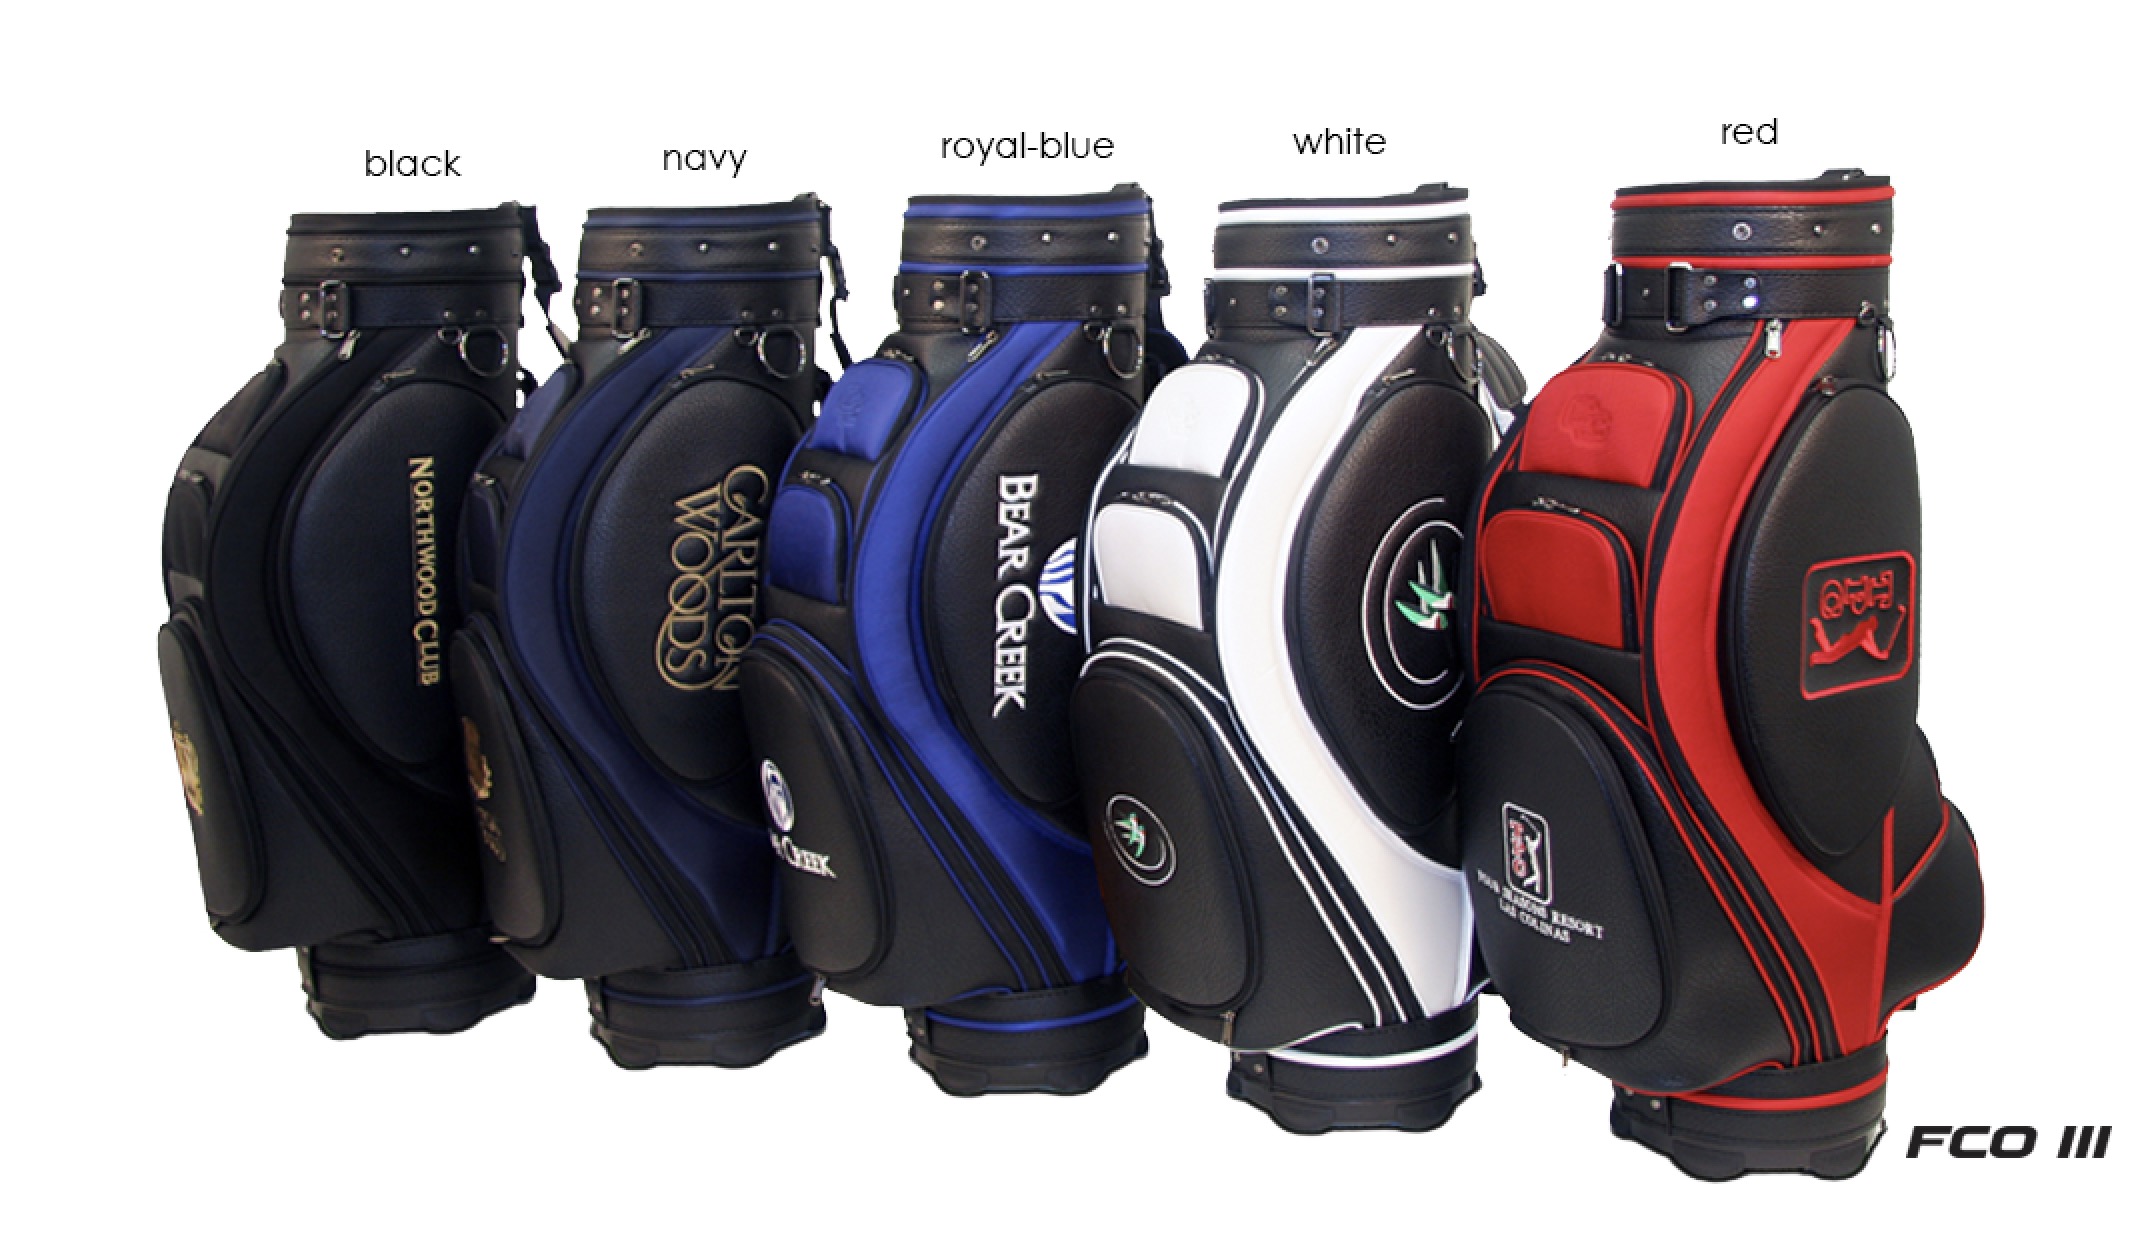 examples of corporate branded golf bags